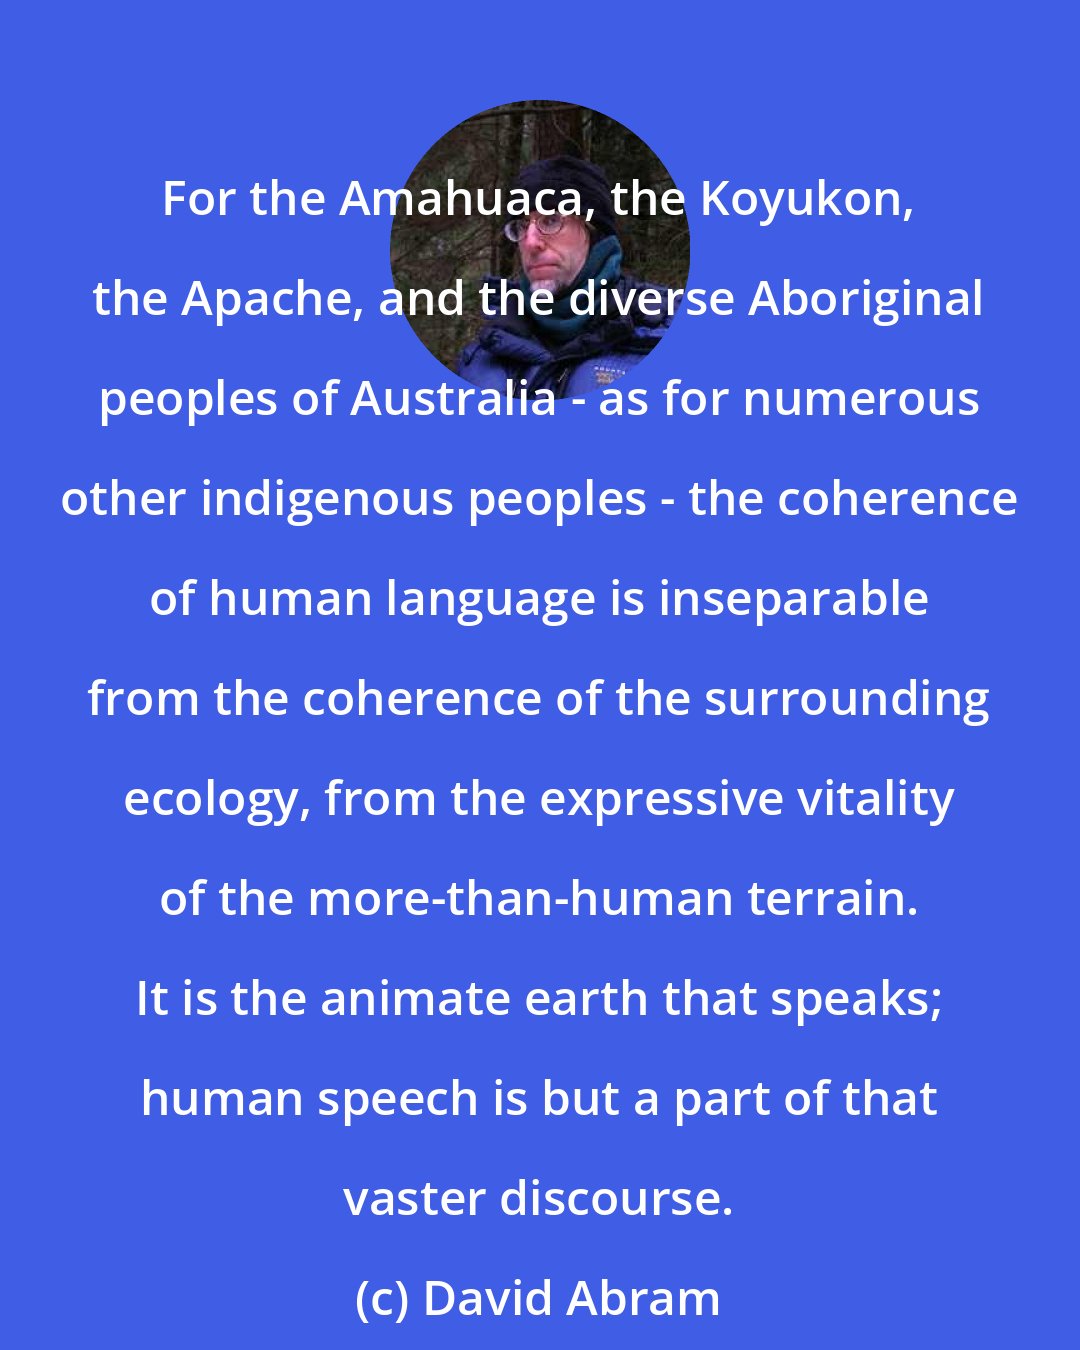 David Abram: For the Amahuaca, the Koyukon, the Apache, and the diverse Aboriginal peoples of Australia - as for numerous other indigenous peoples - the coherence of human language is inseparable from the coherence of the surrounding ecology, from the expressive vitality of the more-than-human terrain. It is the animate earth that speaks; human speech is but a part of that vaster discourse.